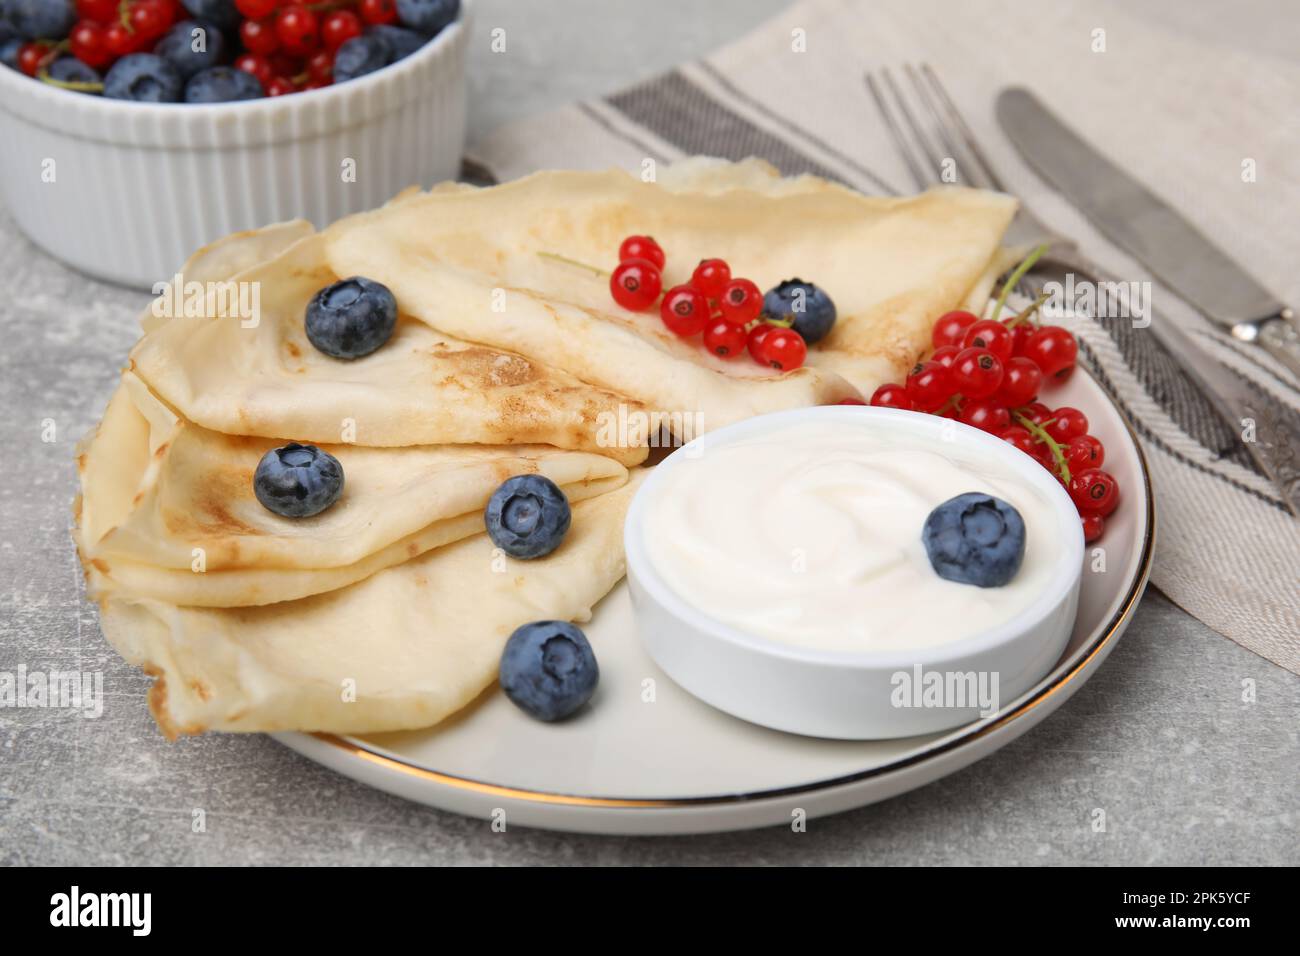 Delicious crepes with natural yogurt, blueberries and red currants on grey table Stock Photo